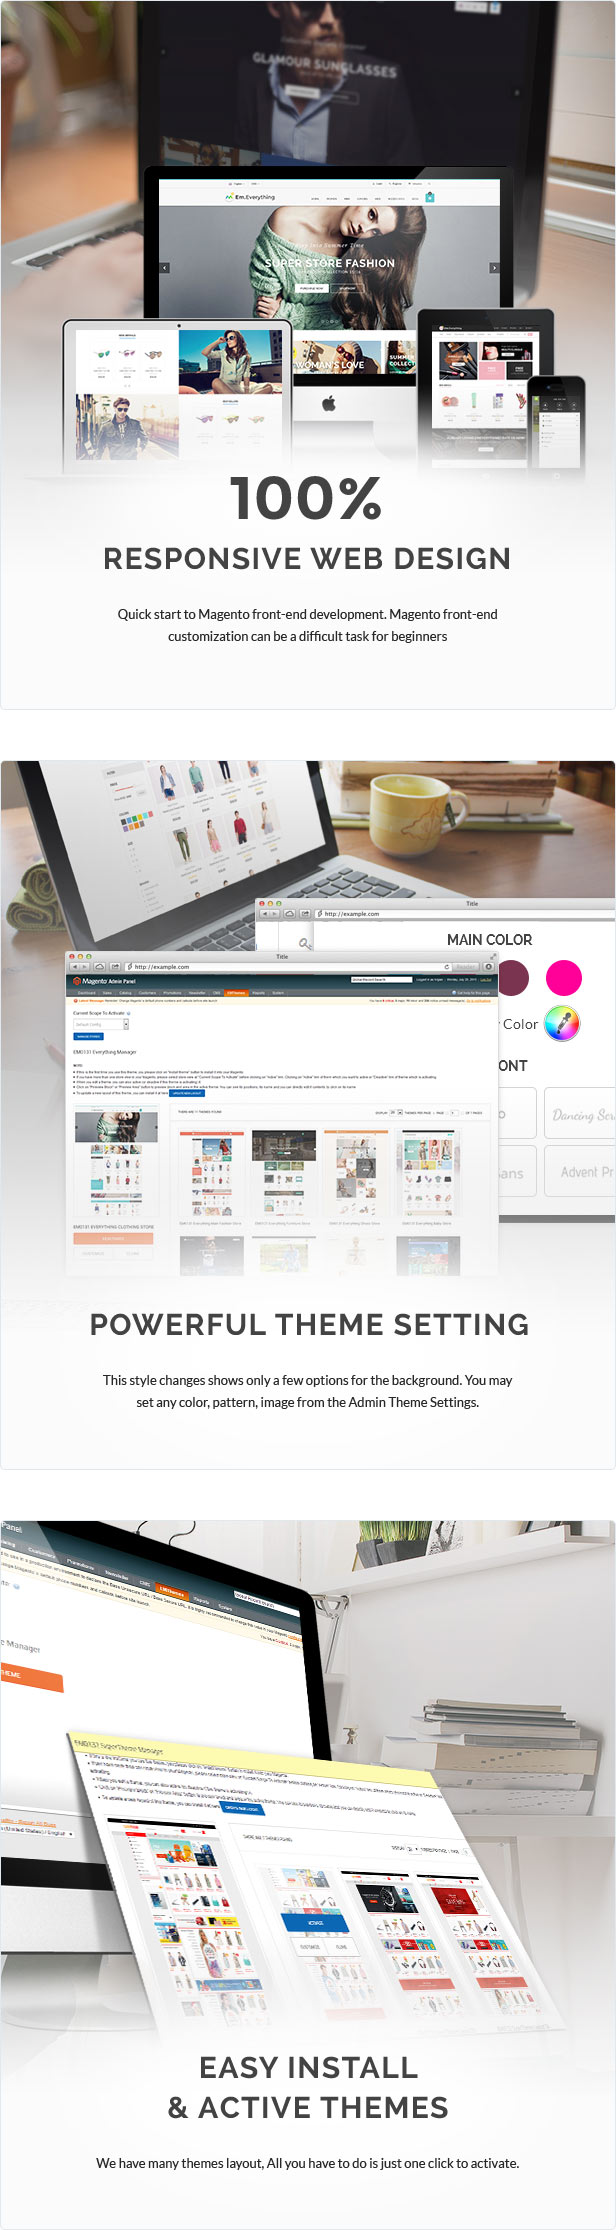 responsive web design, powerful theme setting, easy install and active themes